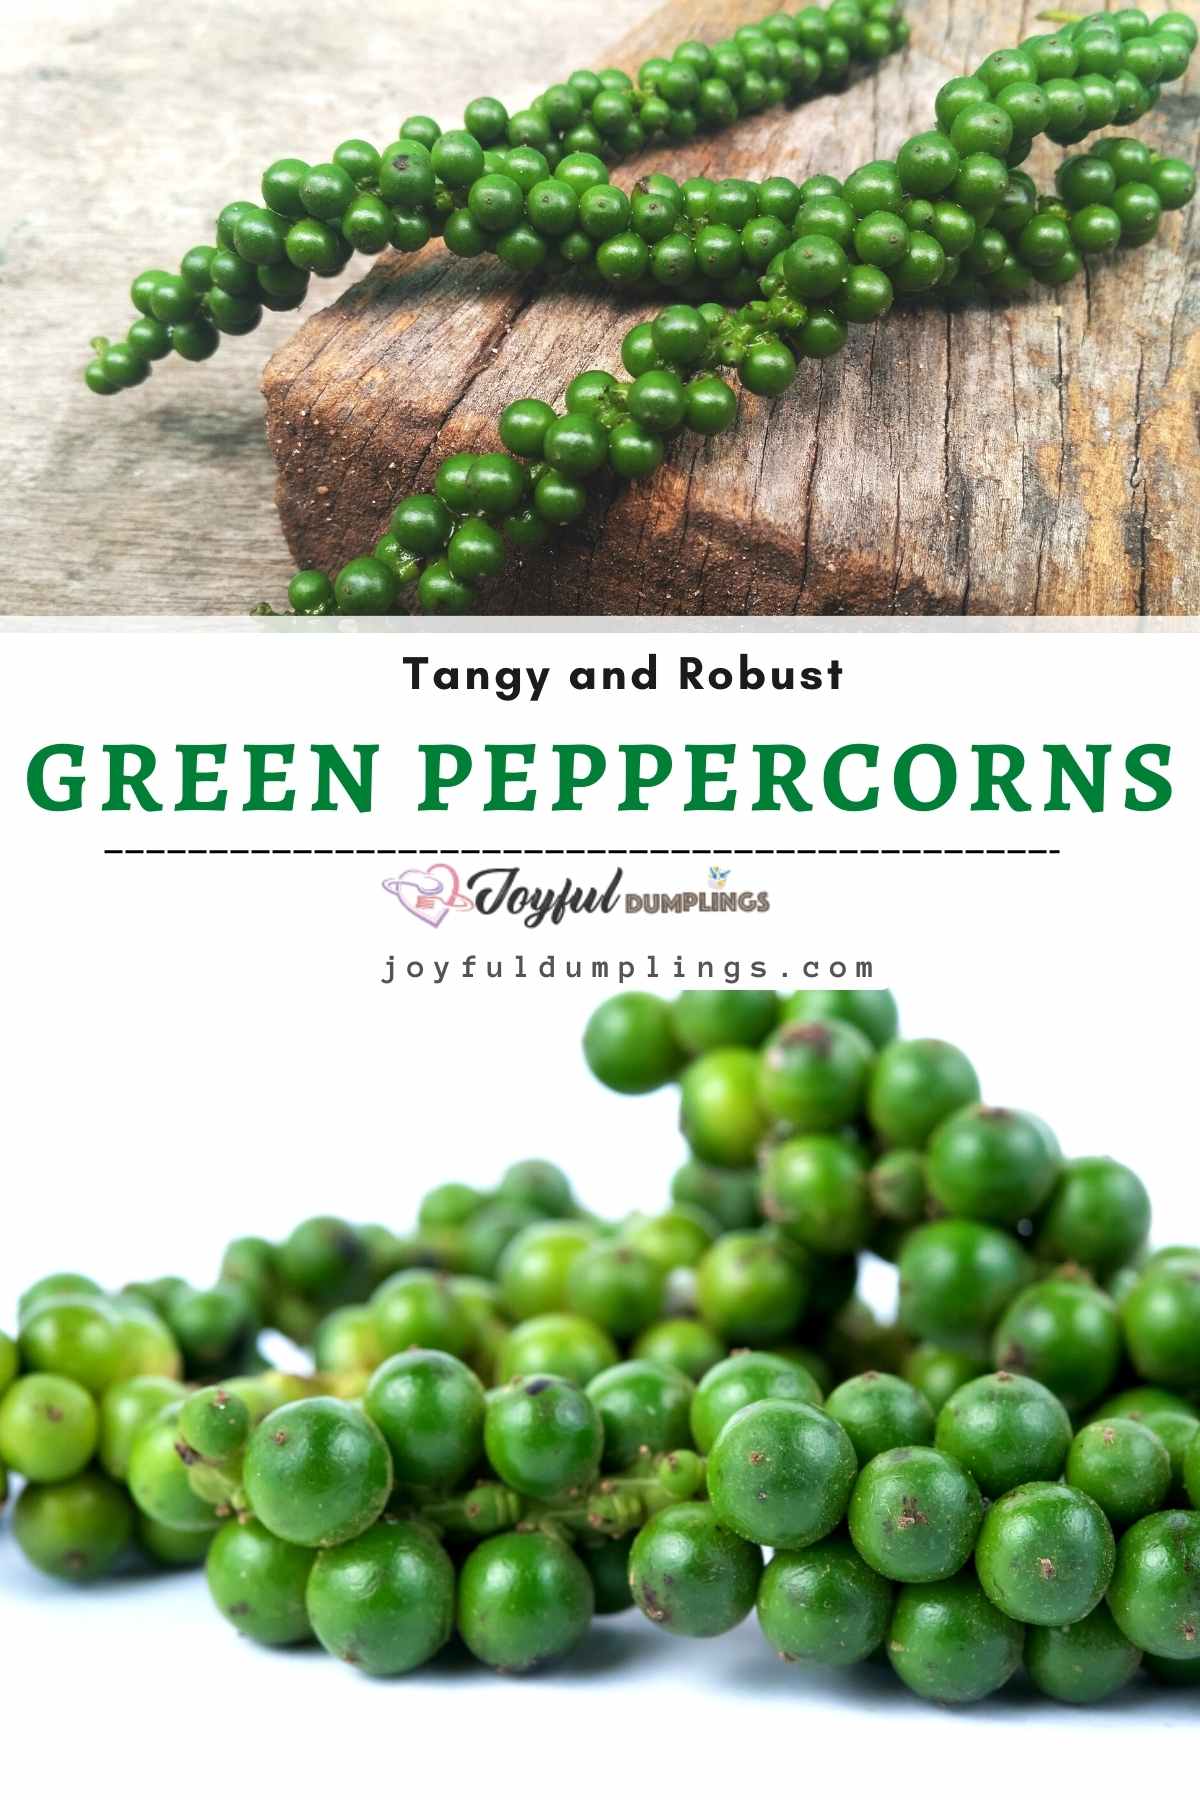 What Are Green Peppercorns?